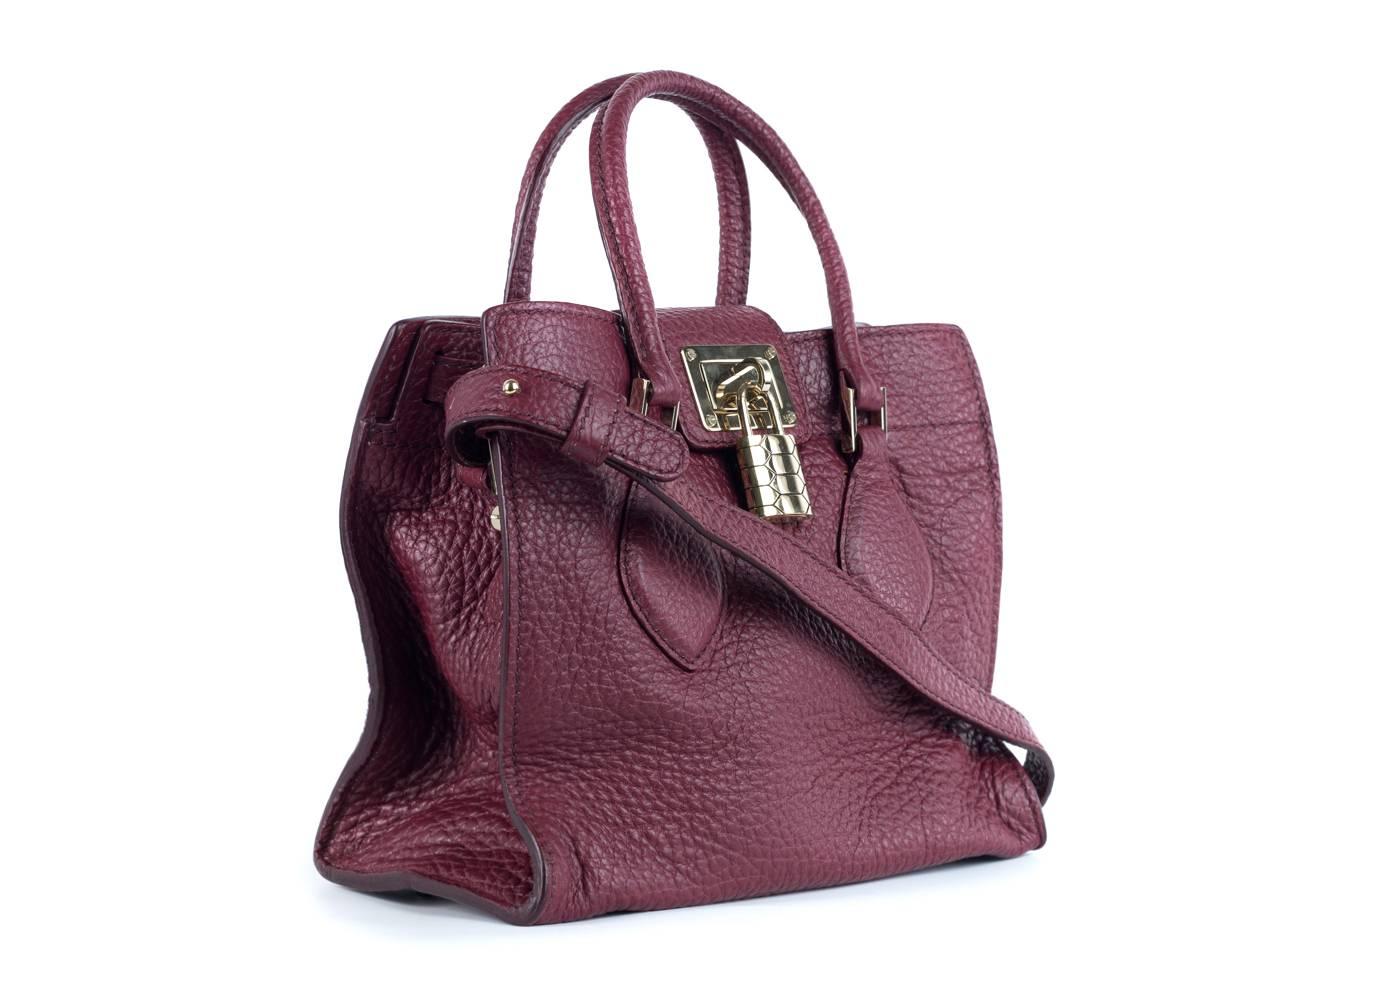 Brand New Roberto Cavalli Satchel
Original Tag & Dust Bag Included
Retails in Stores & Online for $1630
Dimensions: 10.2